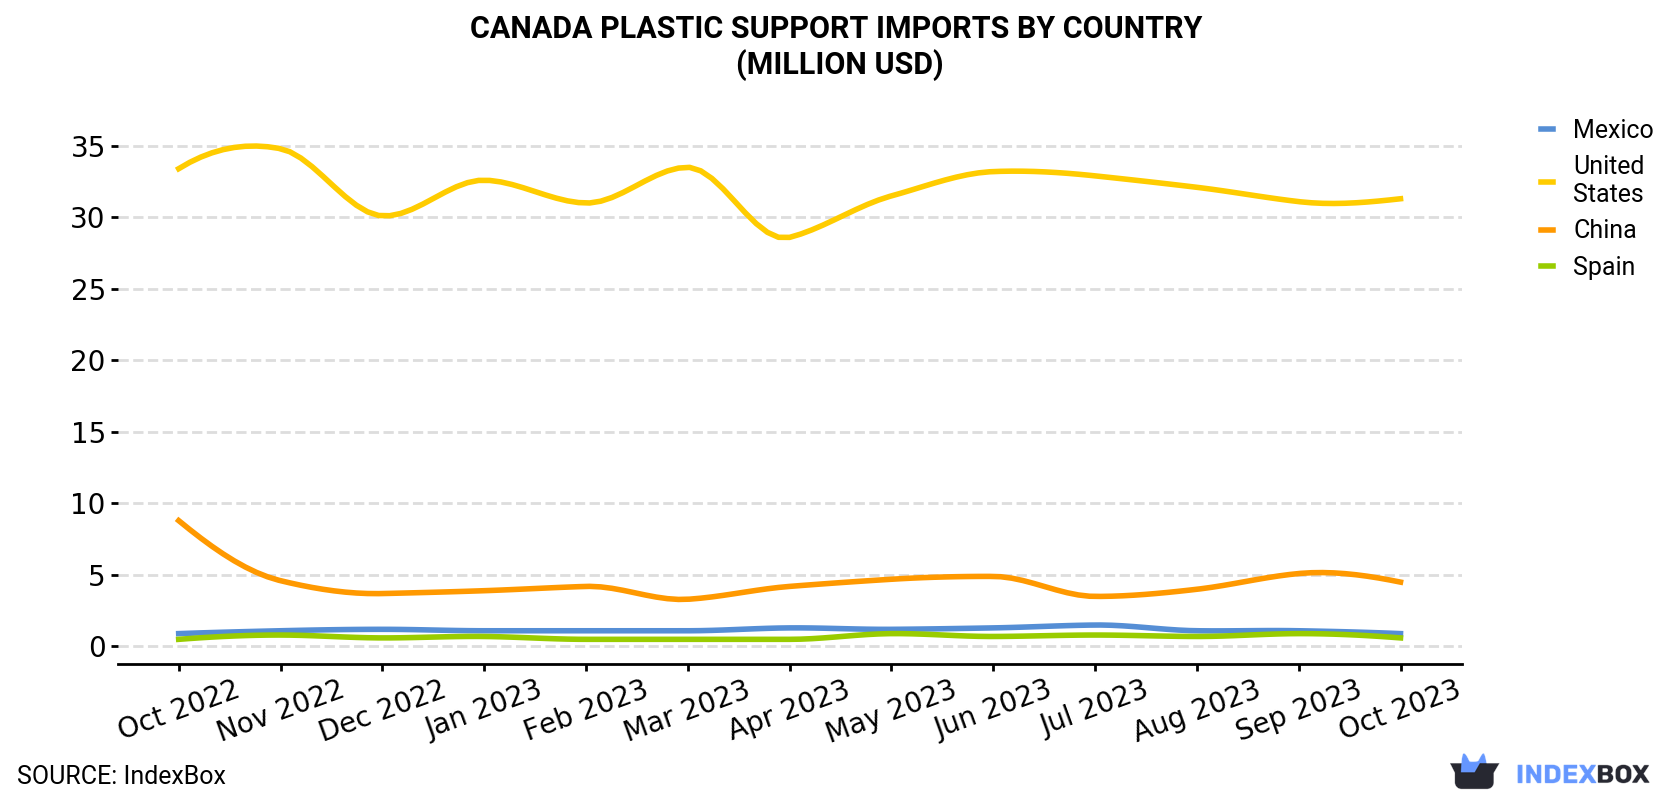 Canada Plastic Support Imports By Country (Million USD)